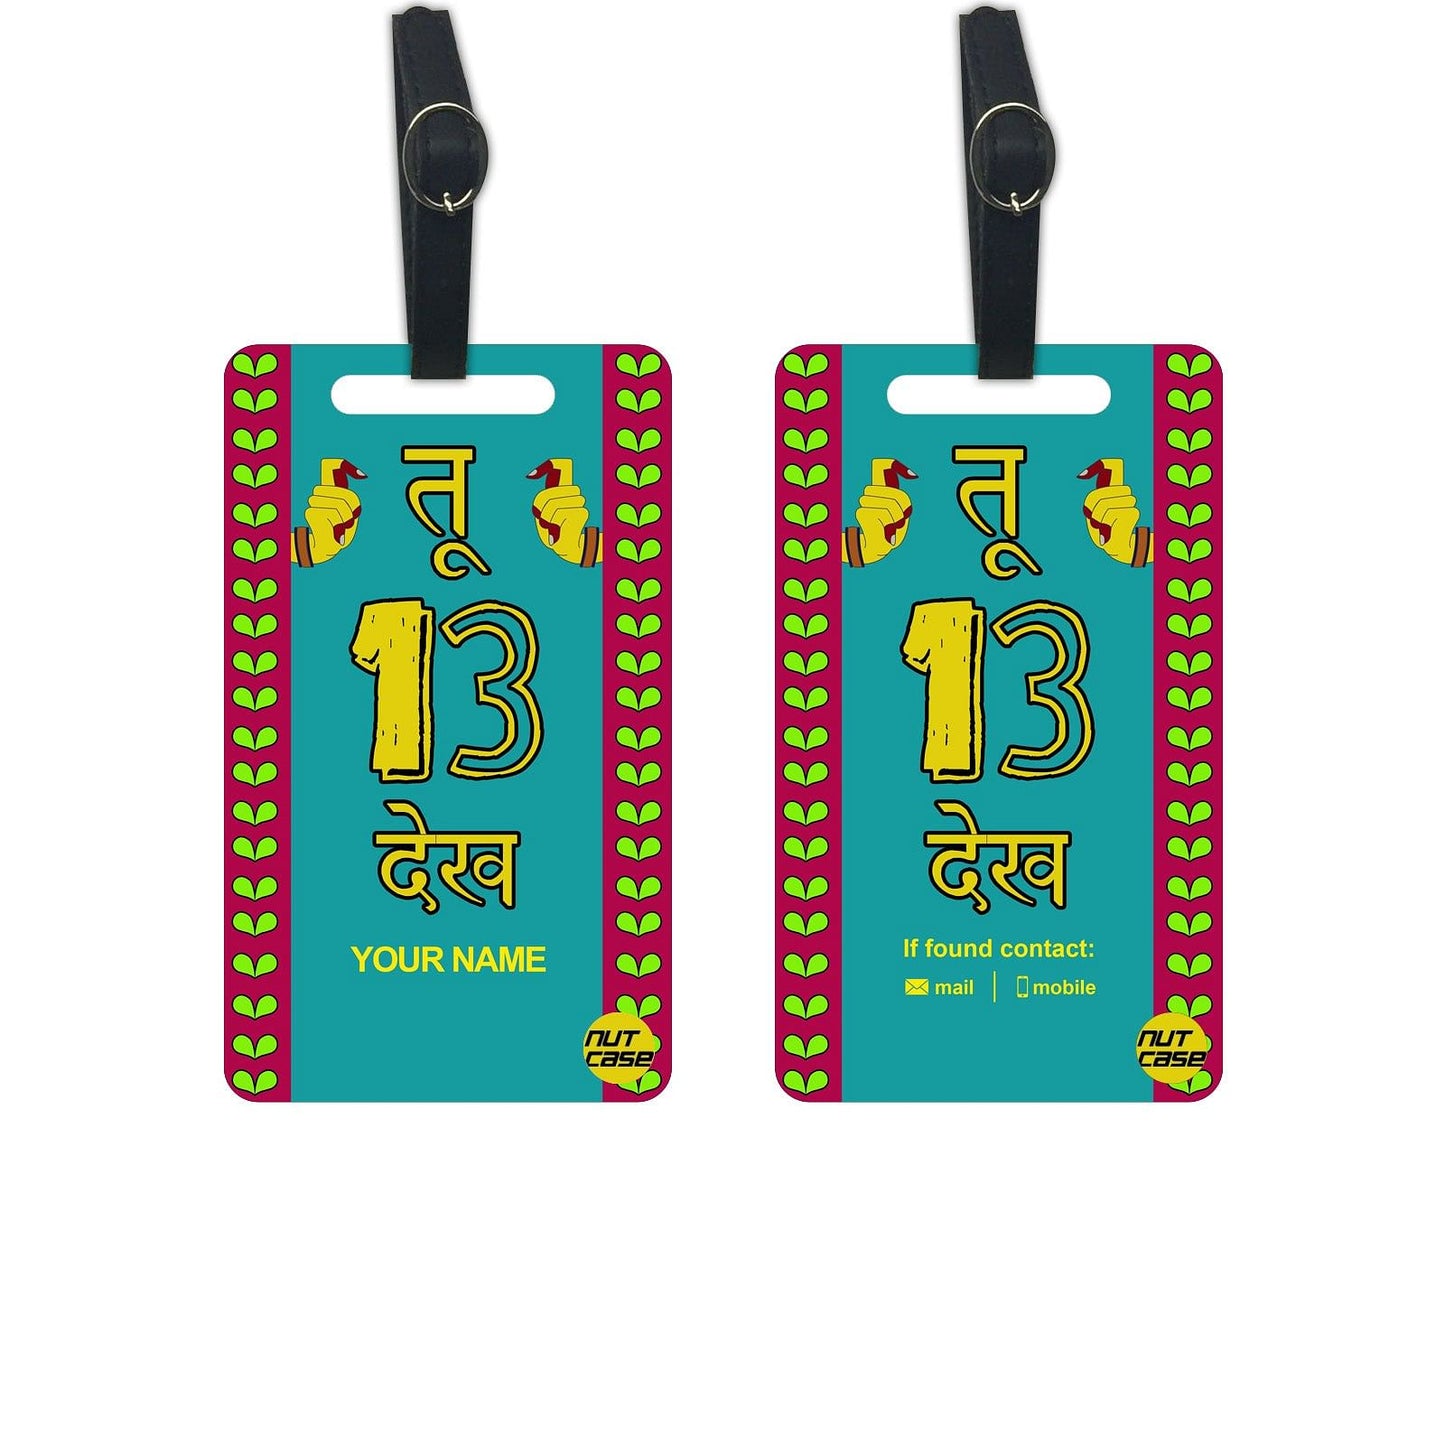 Fancy Personalized Luggage Tag - Add your Name - Set of 2 Nutcase